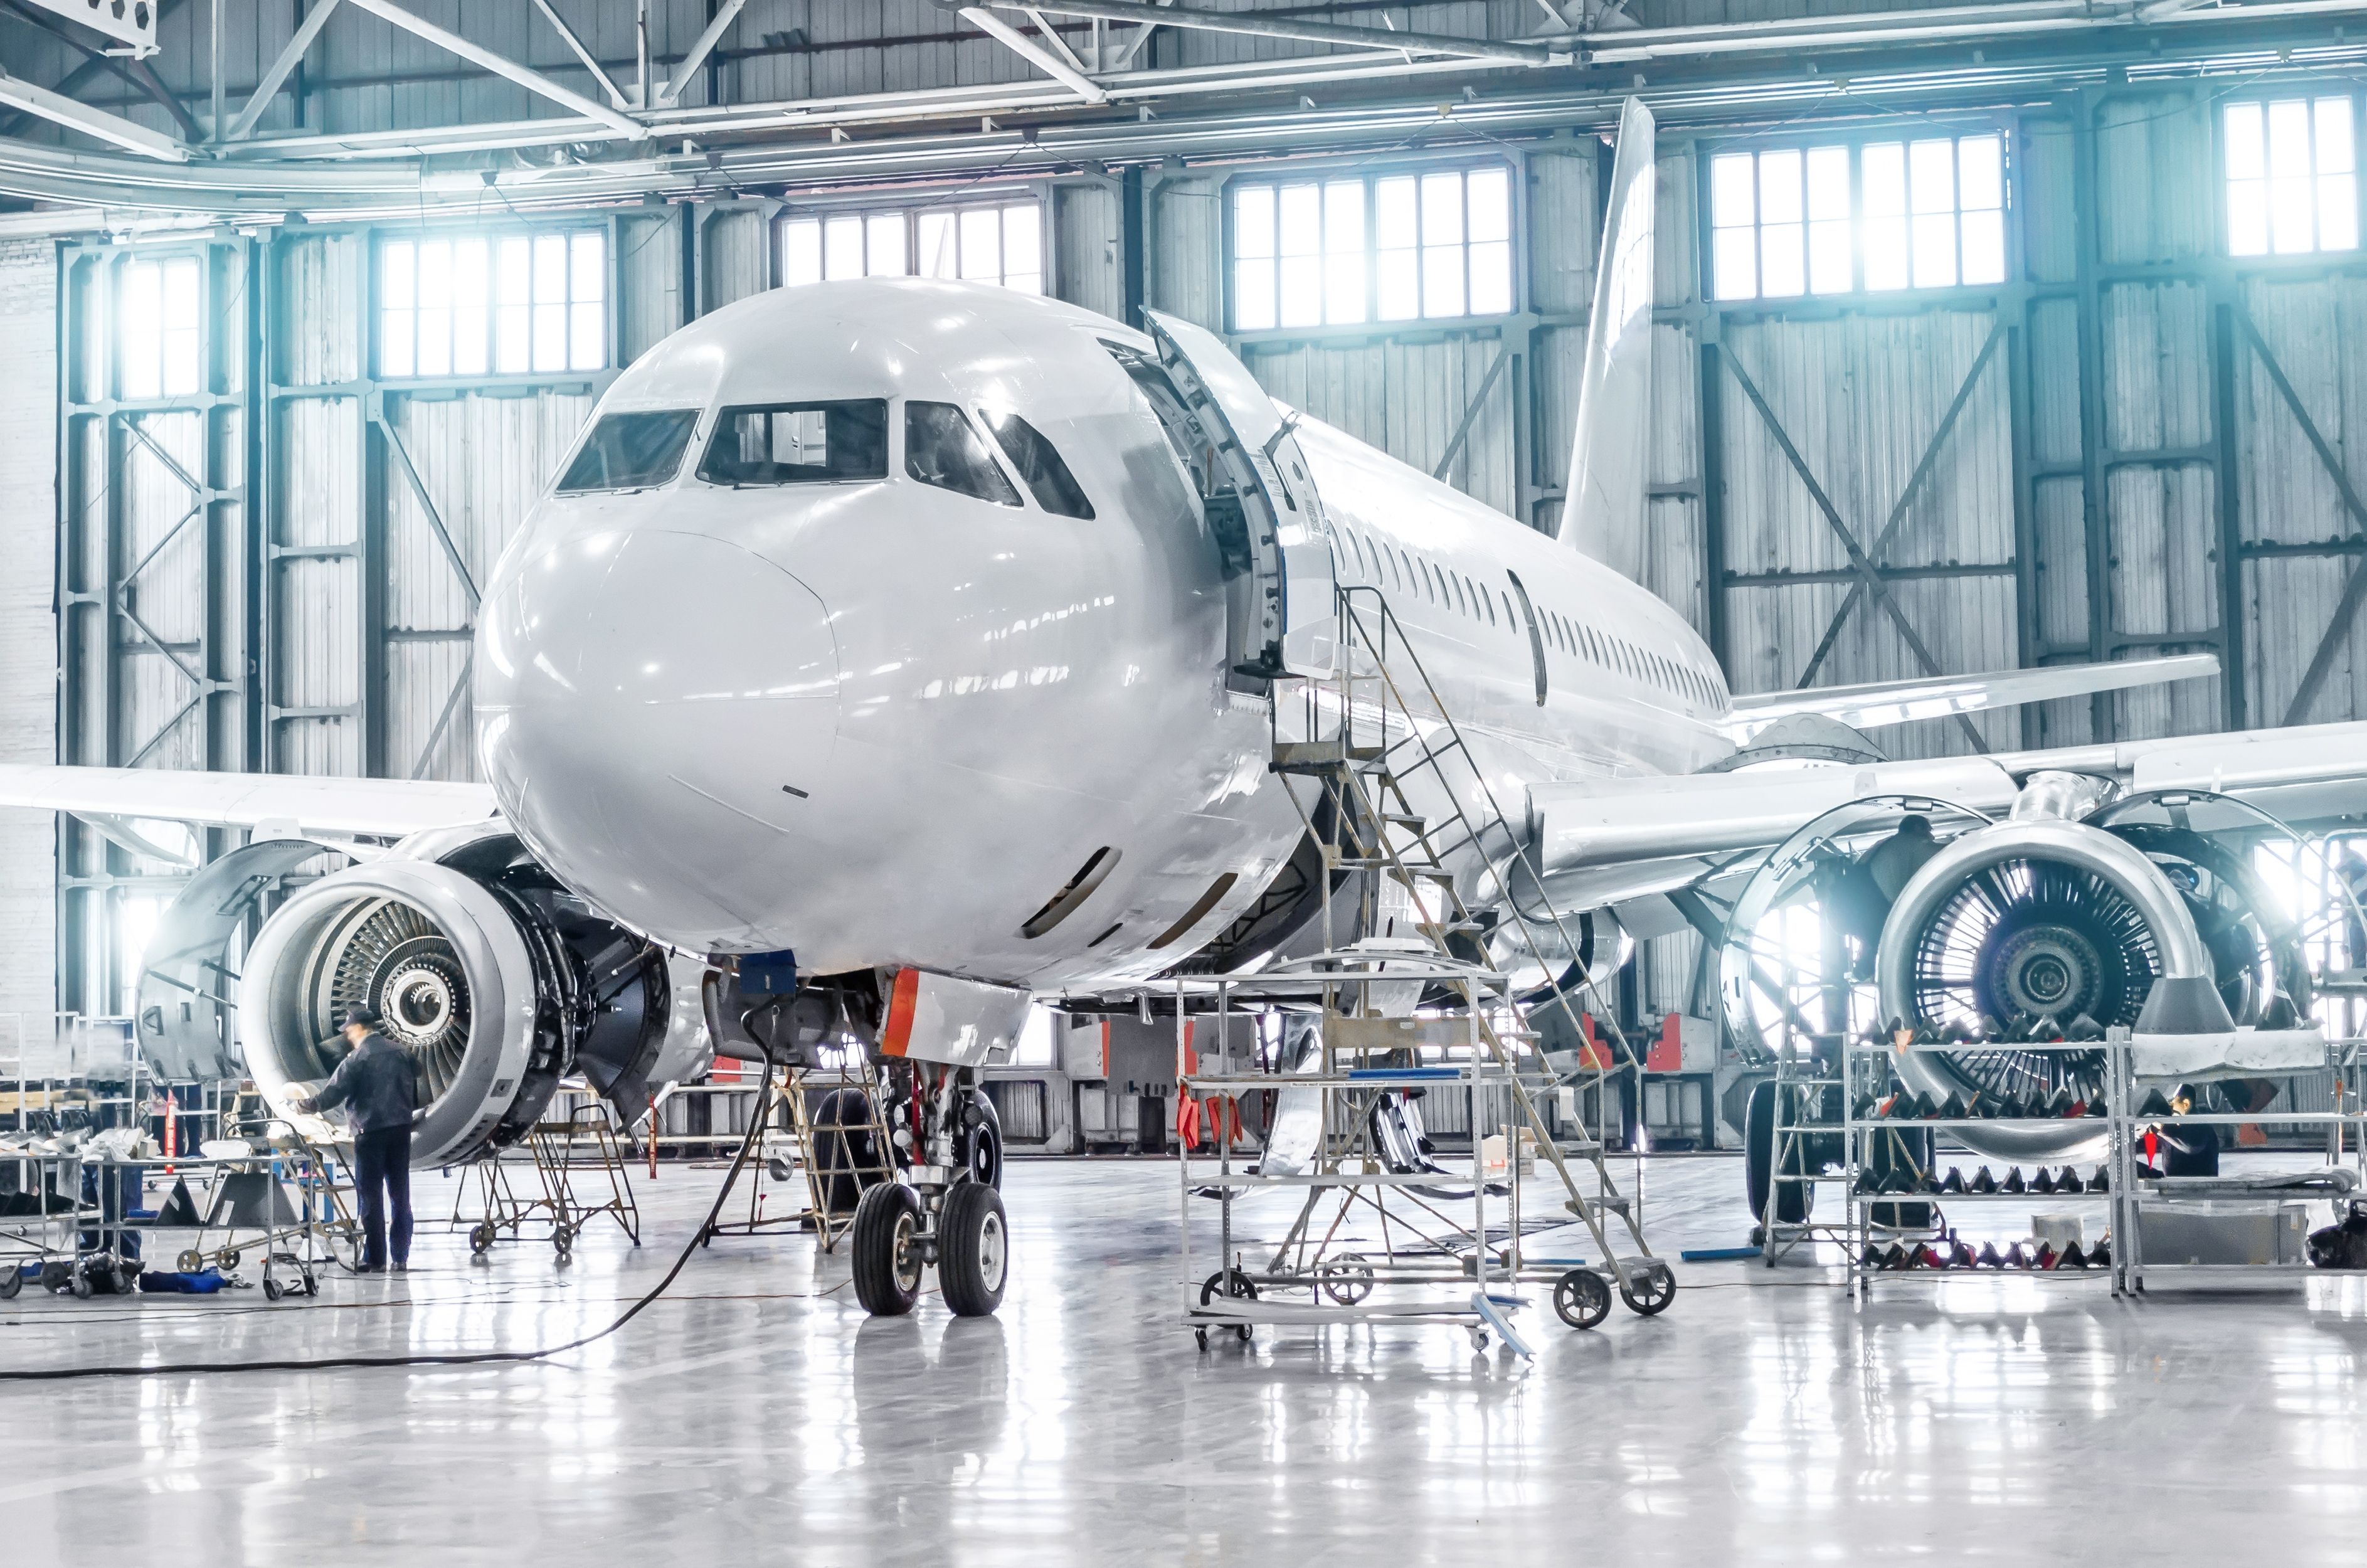 A Passenger aircraft in an airport hangar for maintenance of its engines and fuselage.